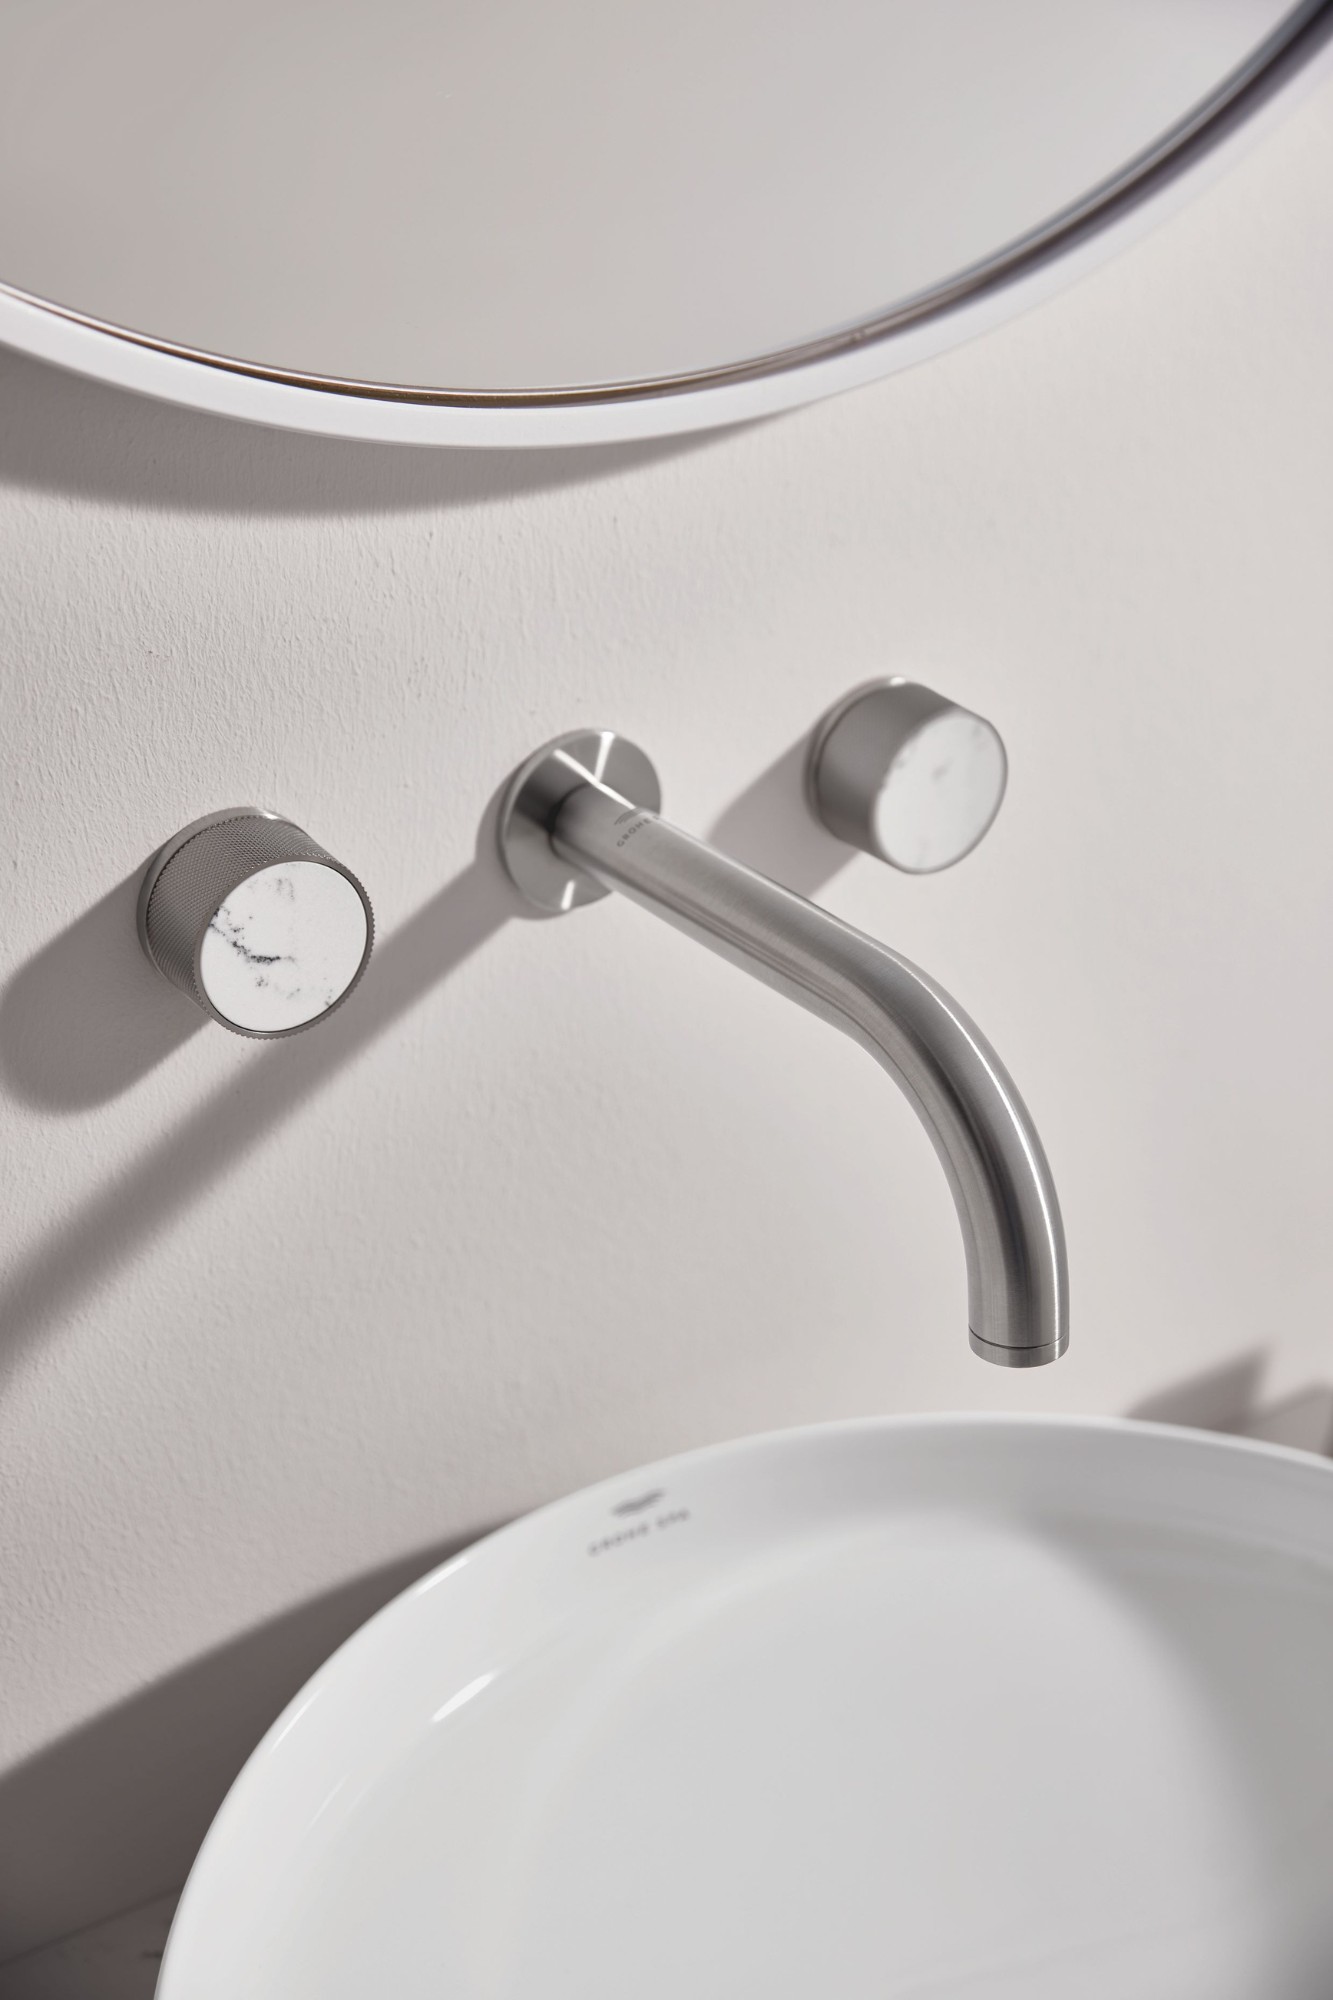 GROHE, GROHE to Exhibit Premium Design Innovations at HIX 2023